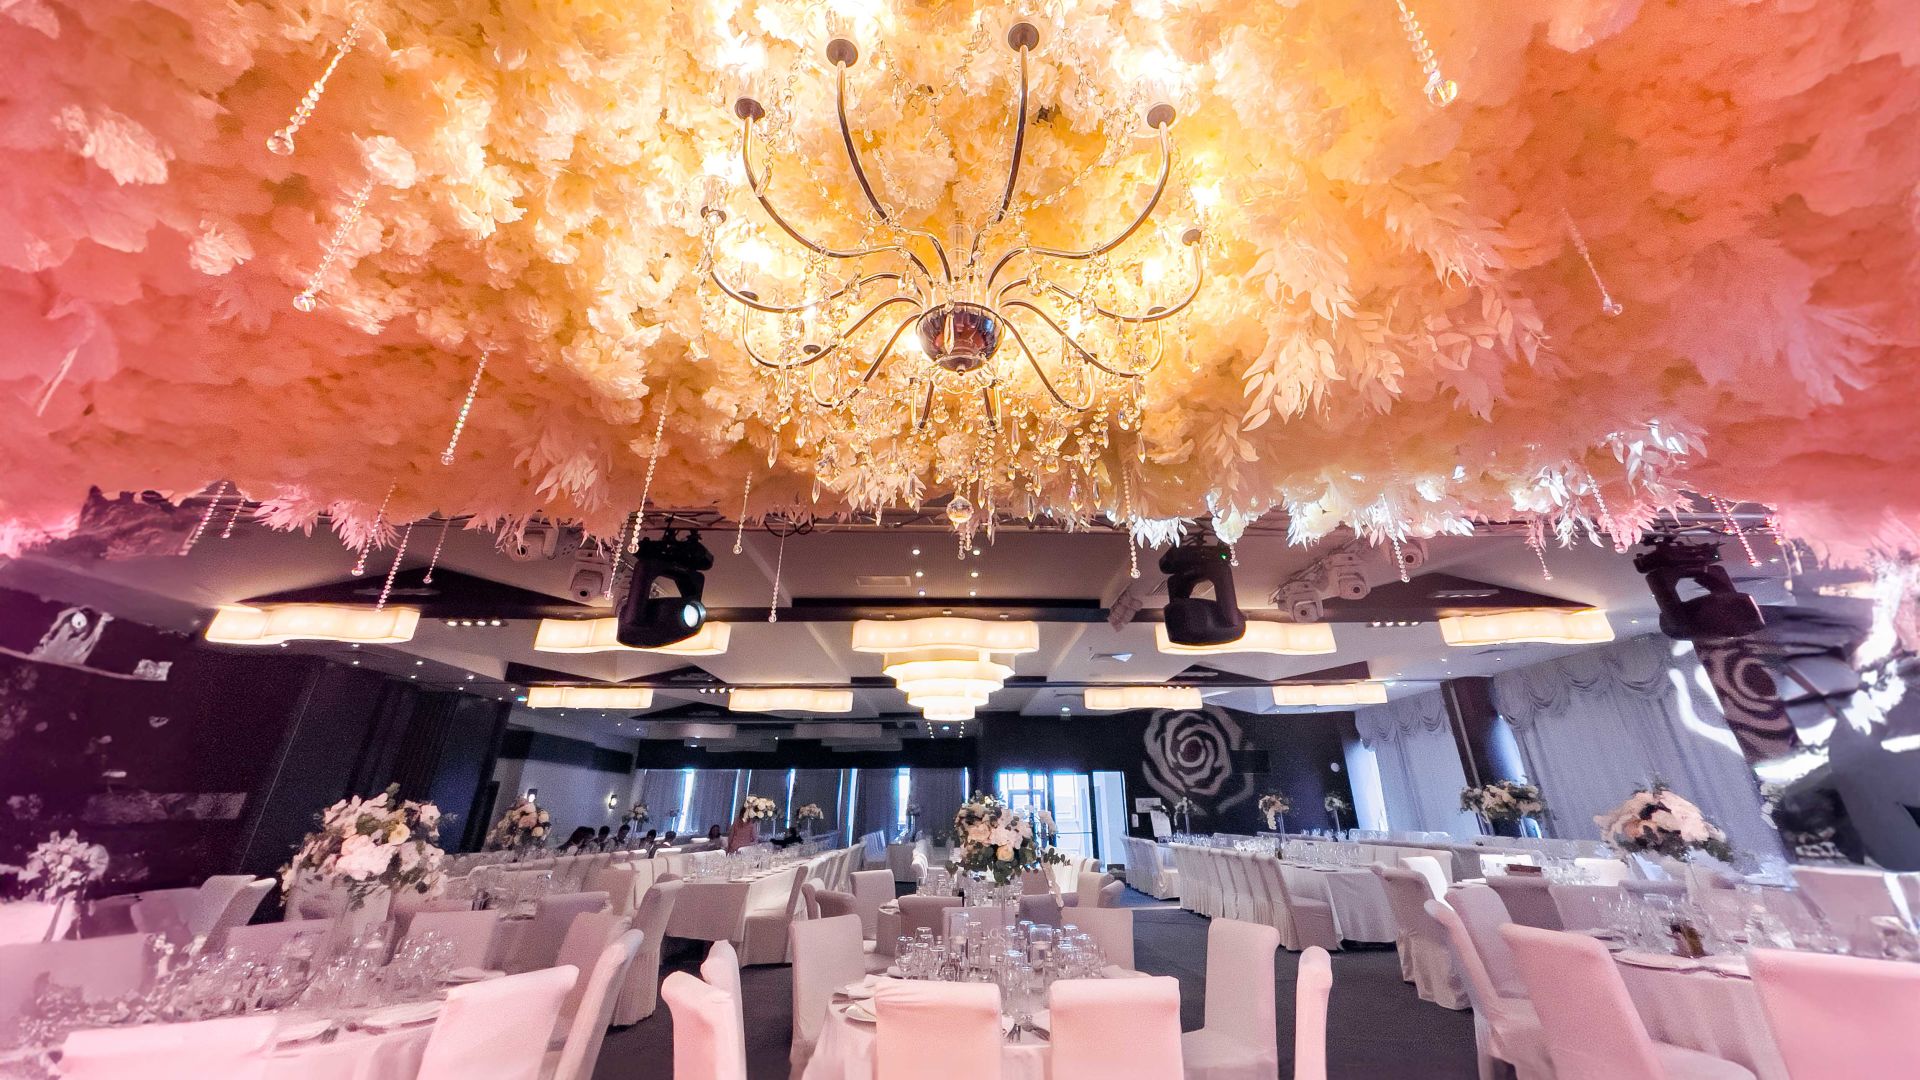 A Stage With A Large Chandelier And Chairs